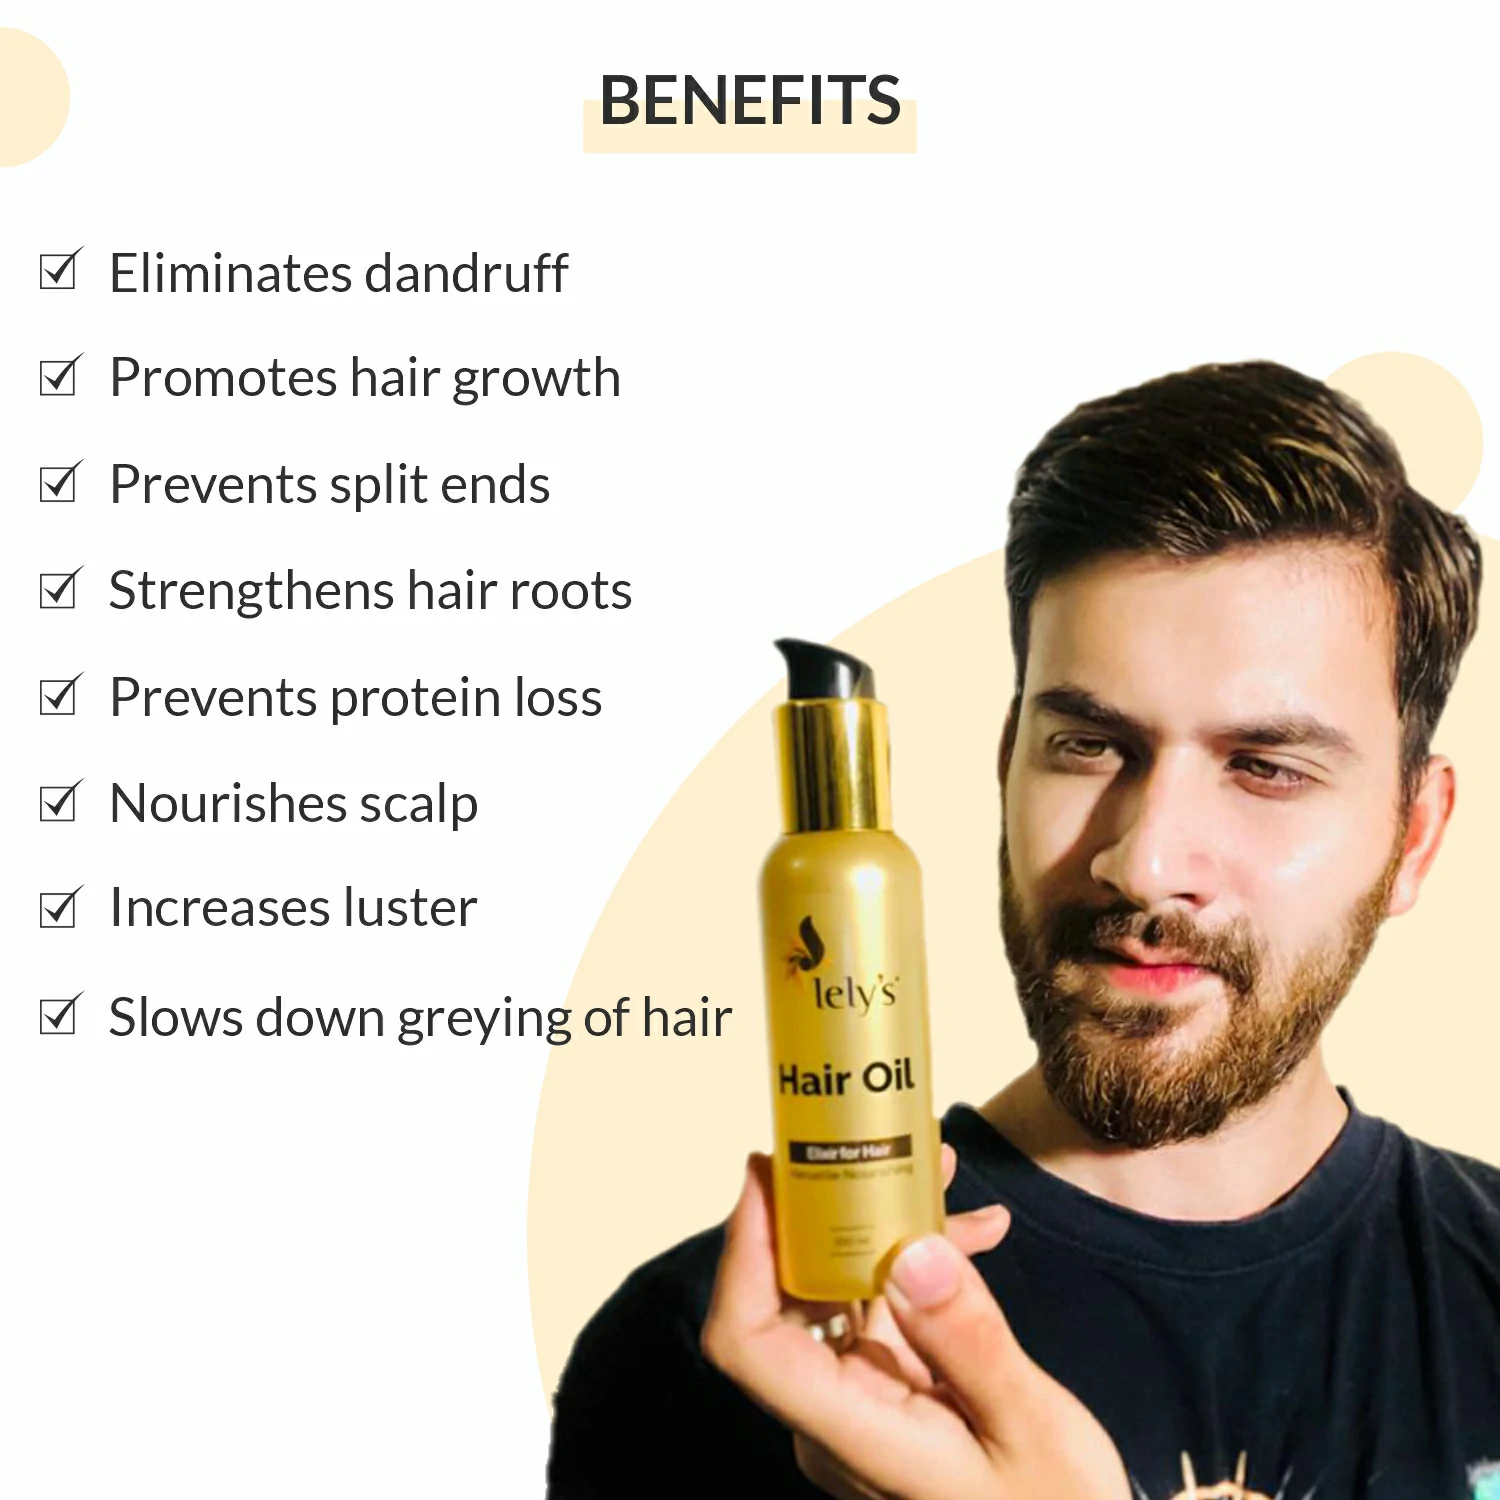 Benefits of Hair Oil